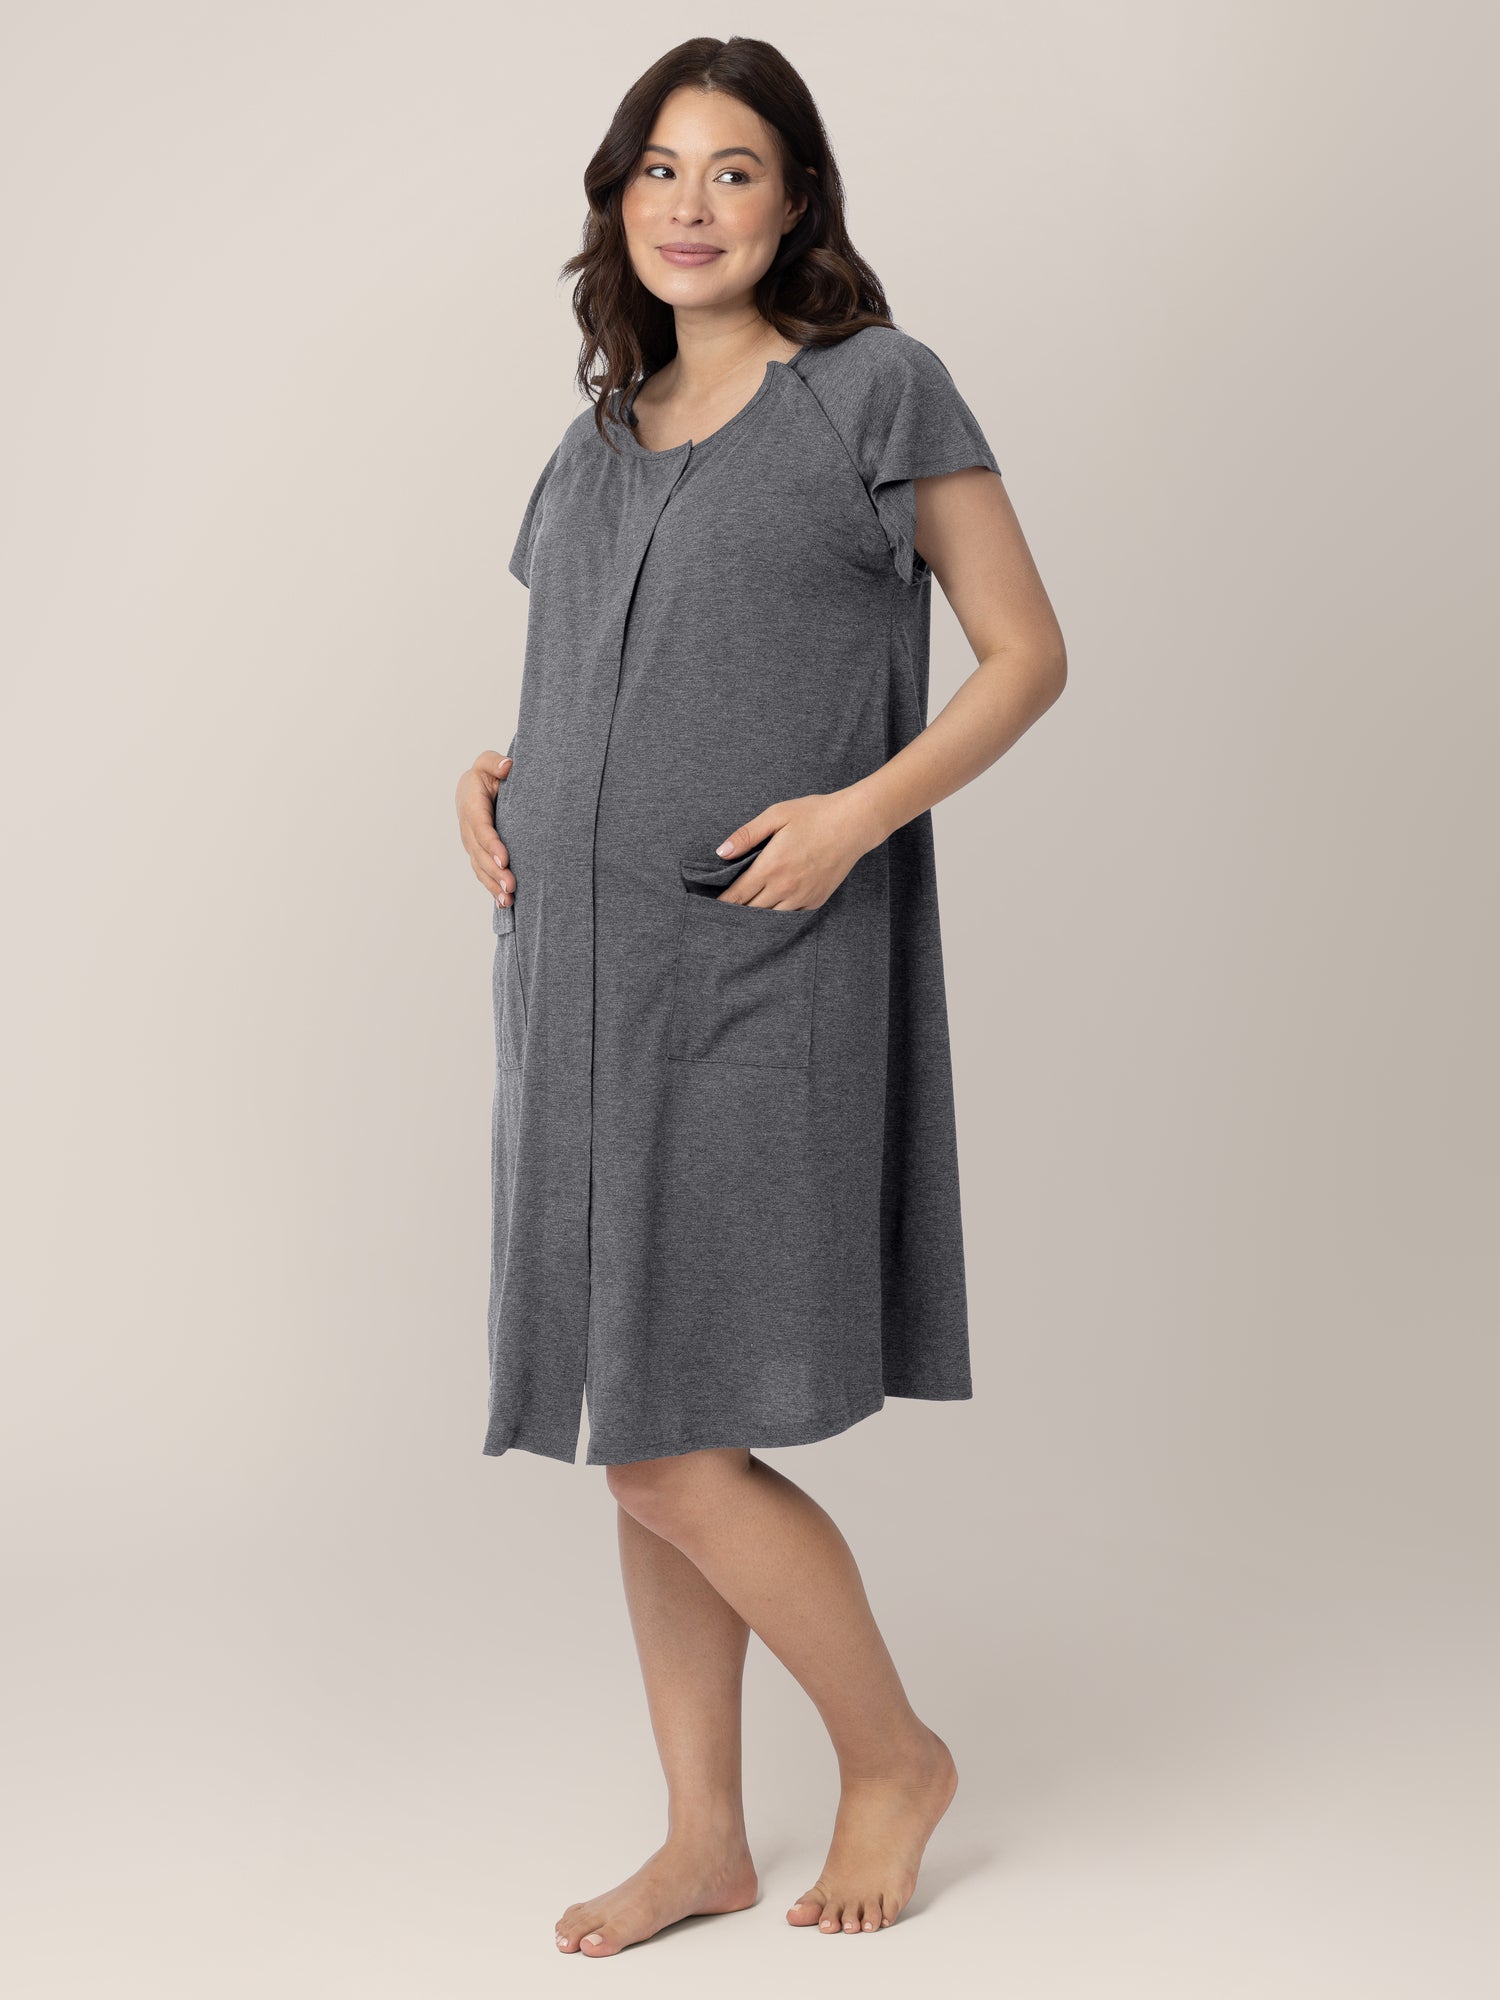 FS13BW4x13_1 Kindred Bravely Universal Labor And Delivery Gown 3